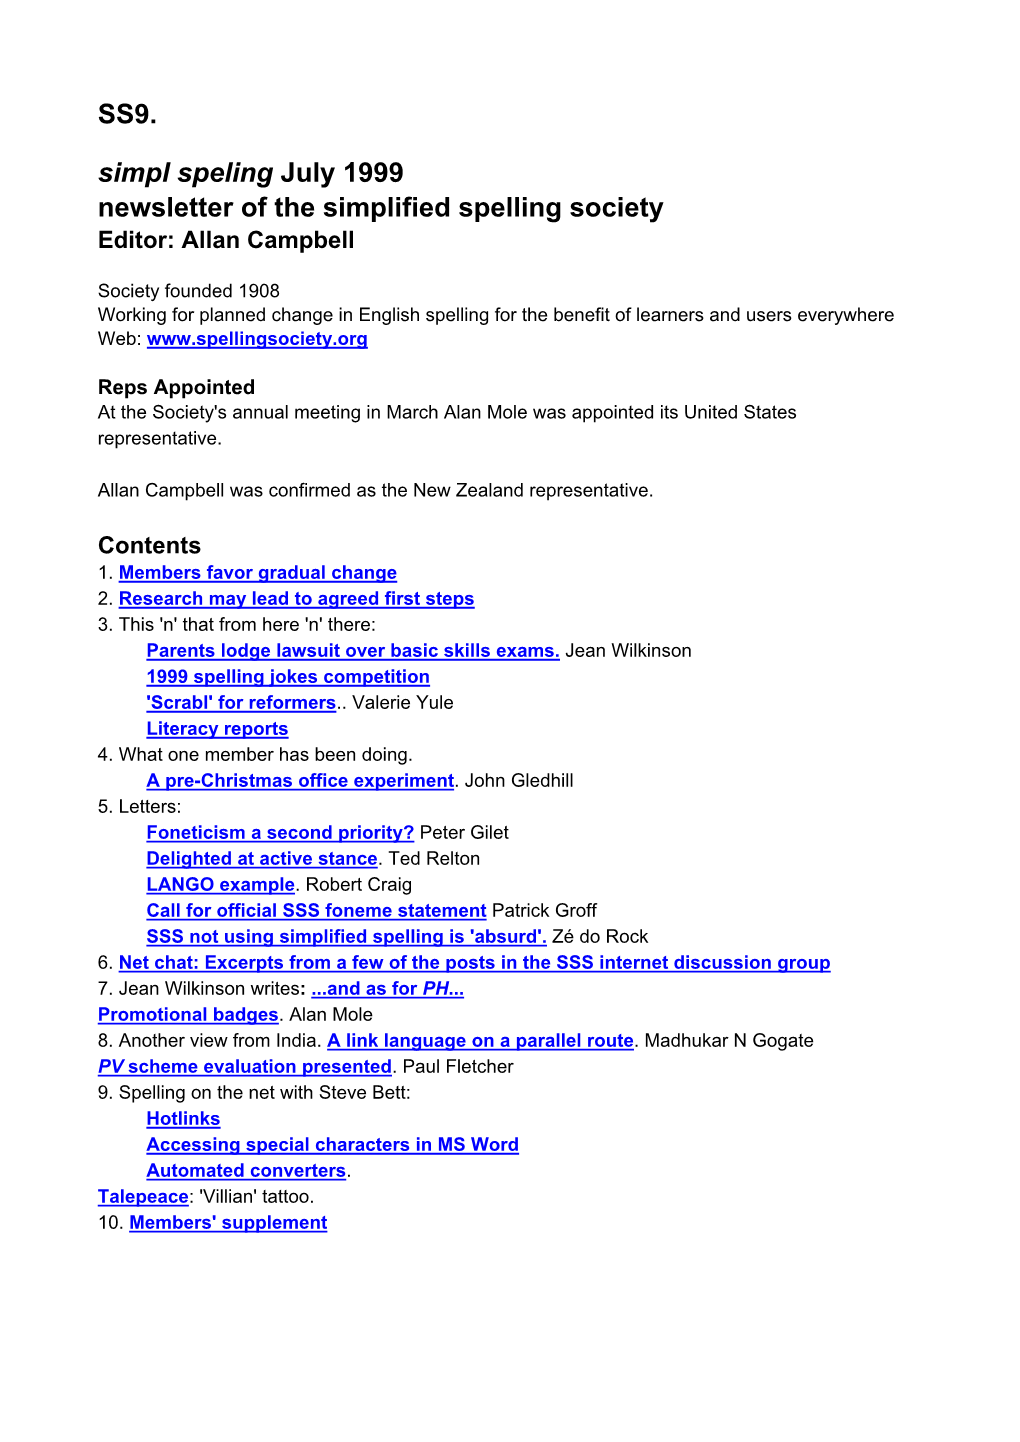 Simpl Speling July 1999 Newsletter of the Simplified Spelling Society Editor: Allan Campbell